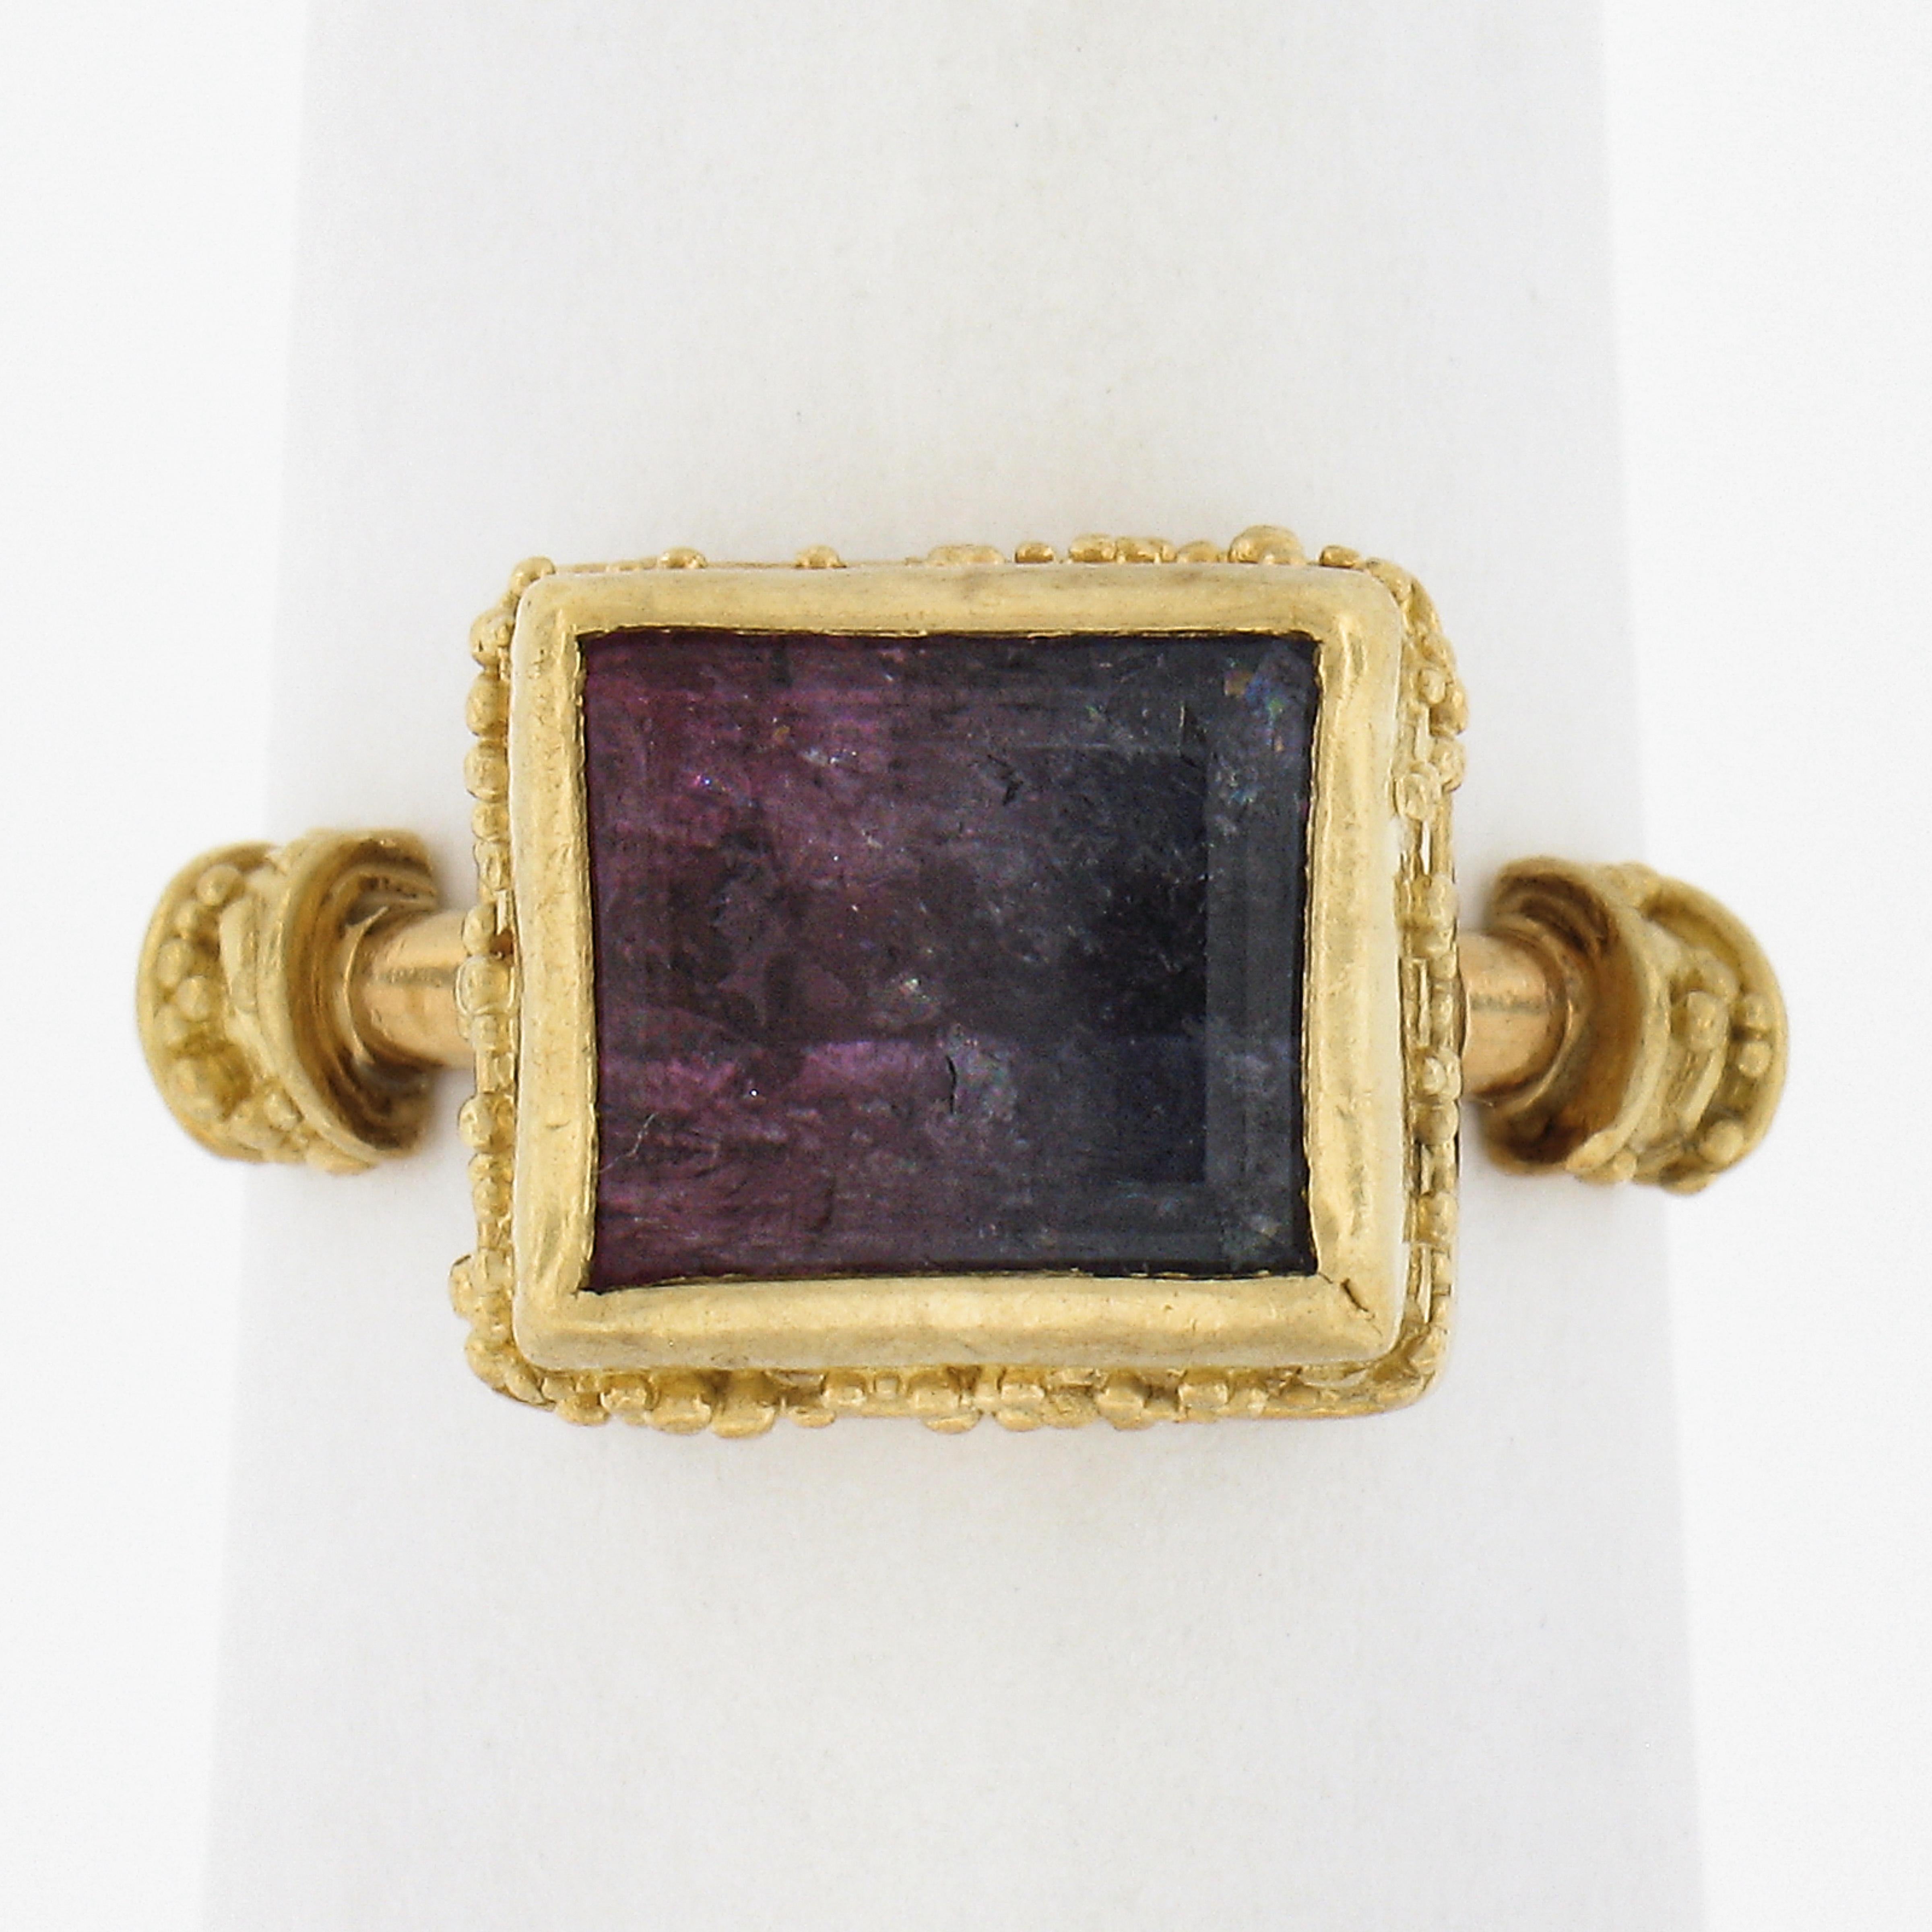 --Stone(s):--
(1) Natural Genuine Watermelon Tourmaline - Rectangular Cut - Bezel Set - Green and Purplish-Pink Color - 8.9x7.2mm (approx.)

Material:	22k Solid Yellow Gold
Weight: 5.37 Grams
Ring Size: 6.0 (Fitted on a finger. We can custom size